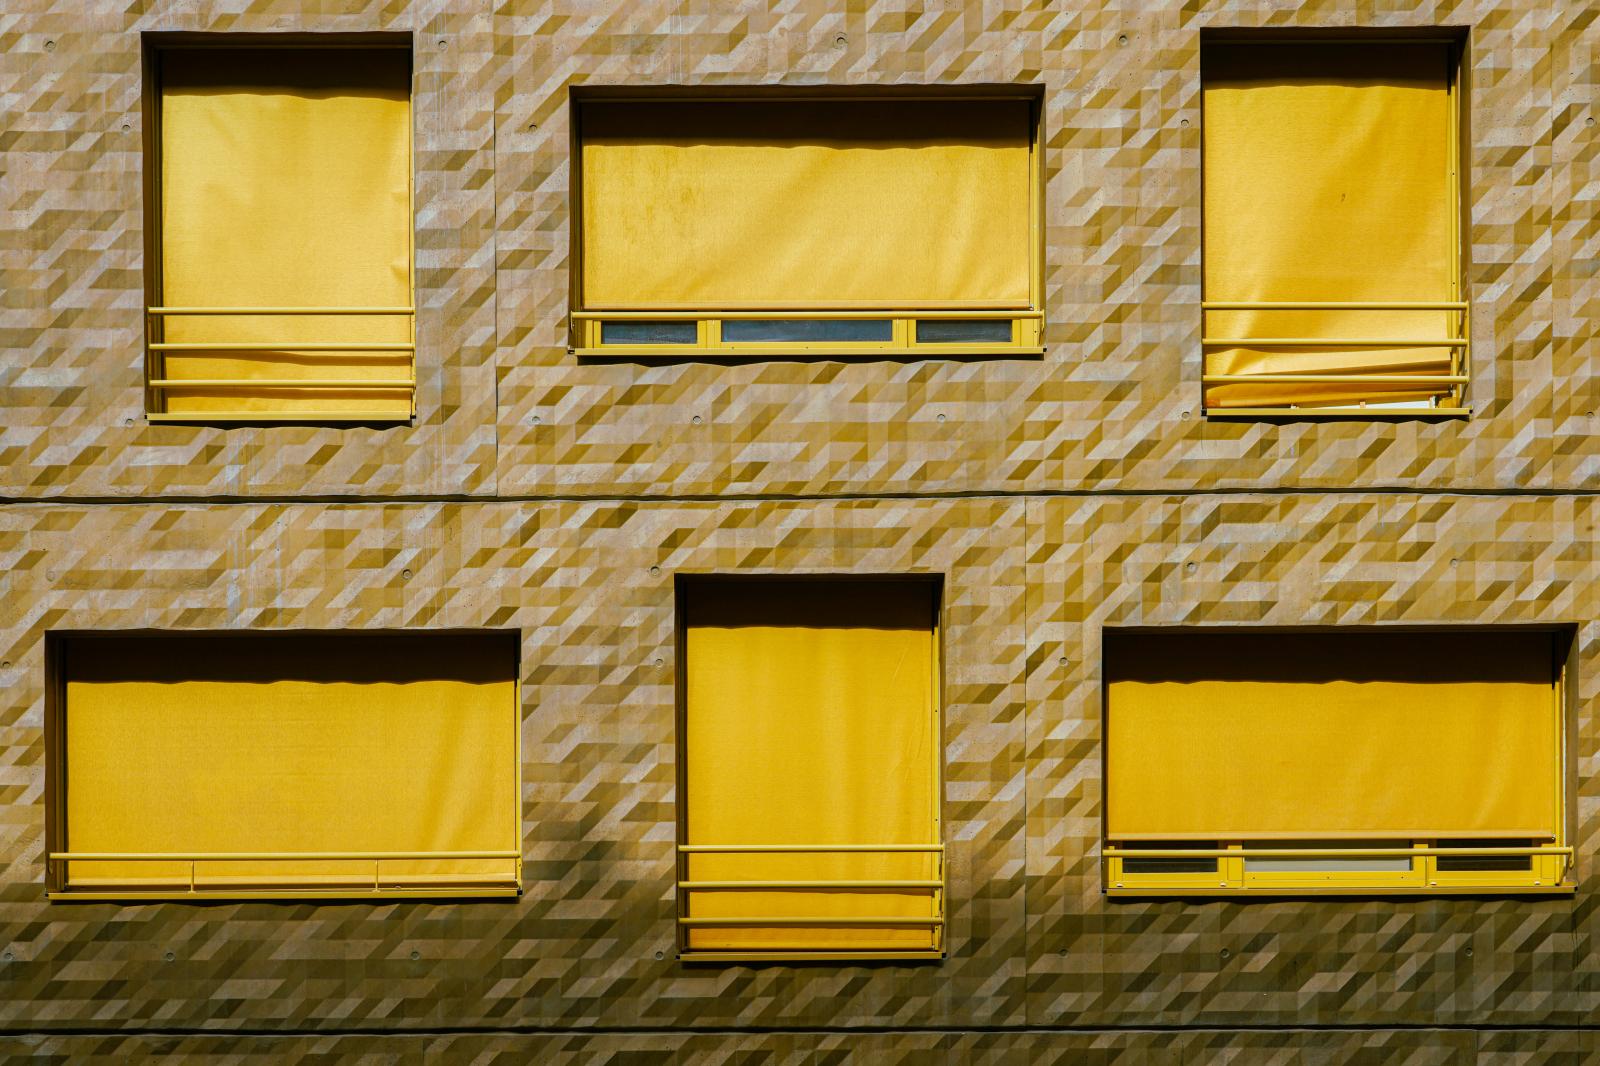 Image from New Photographs -  Lyon, France  # 4269 4/2024 Harmony in Hues and Angles:...